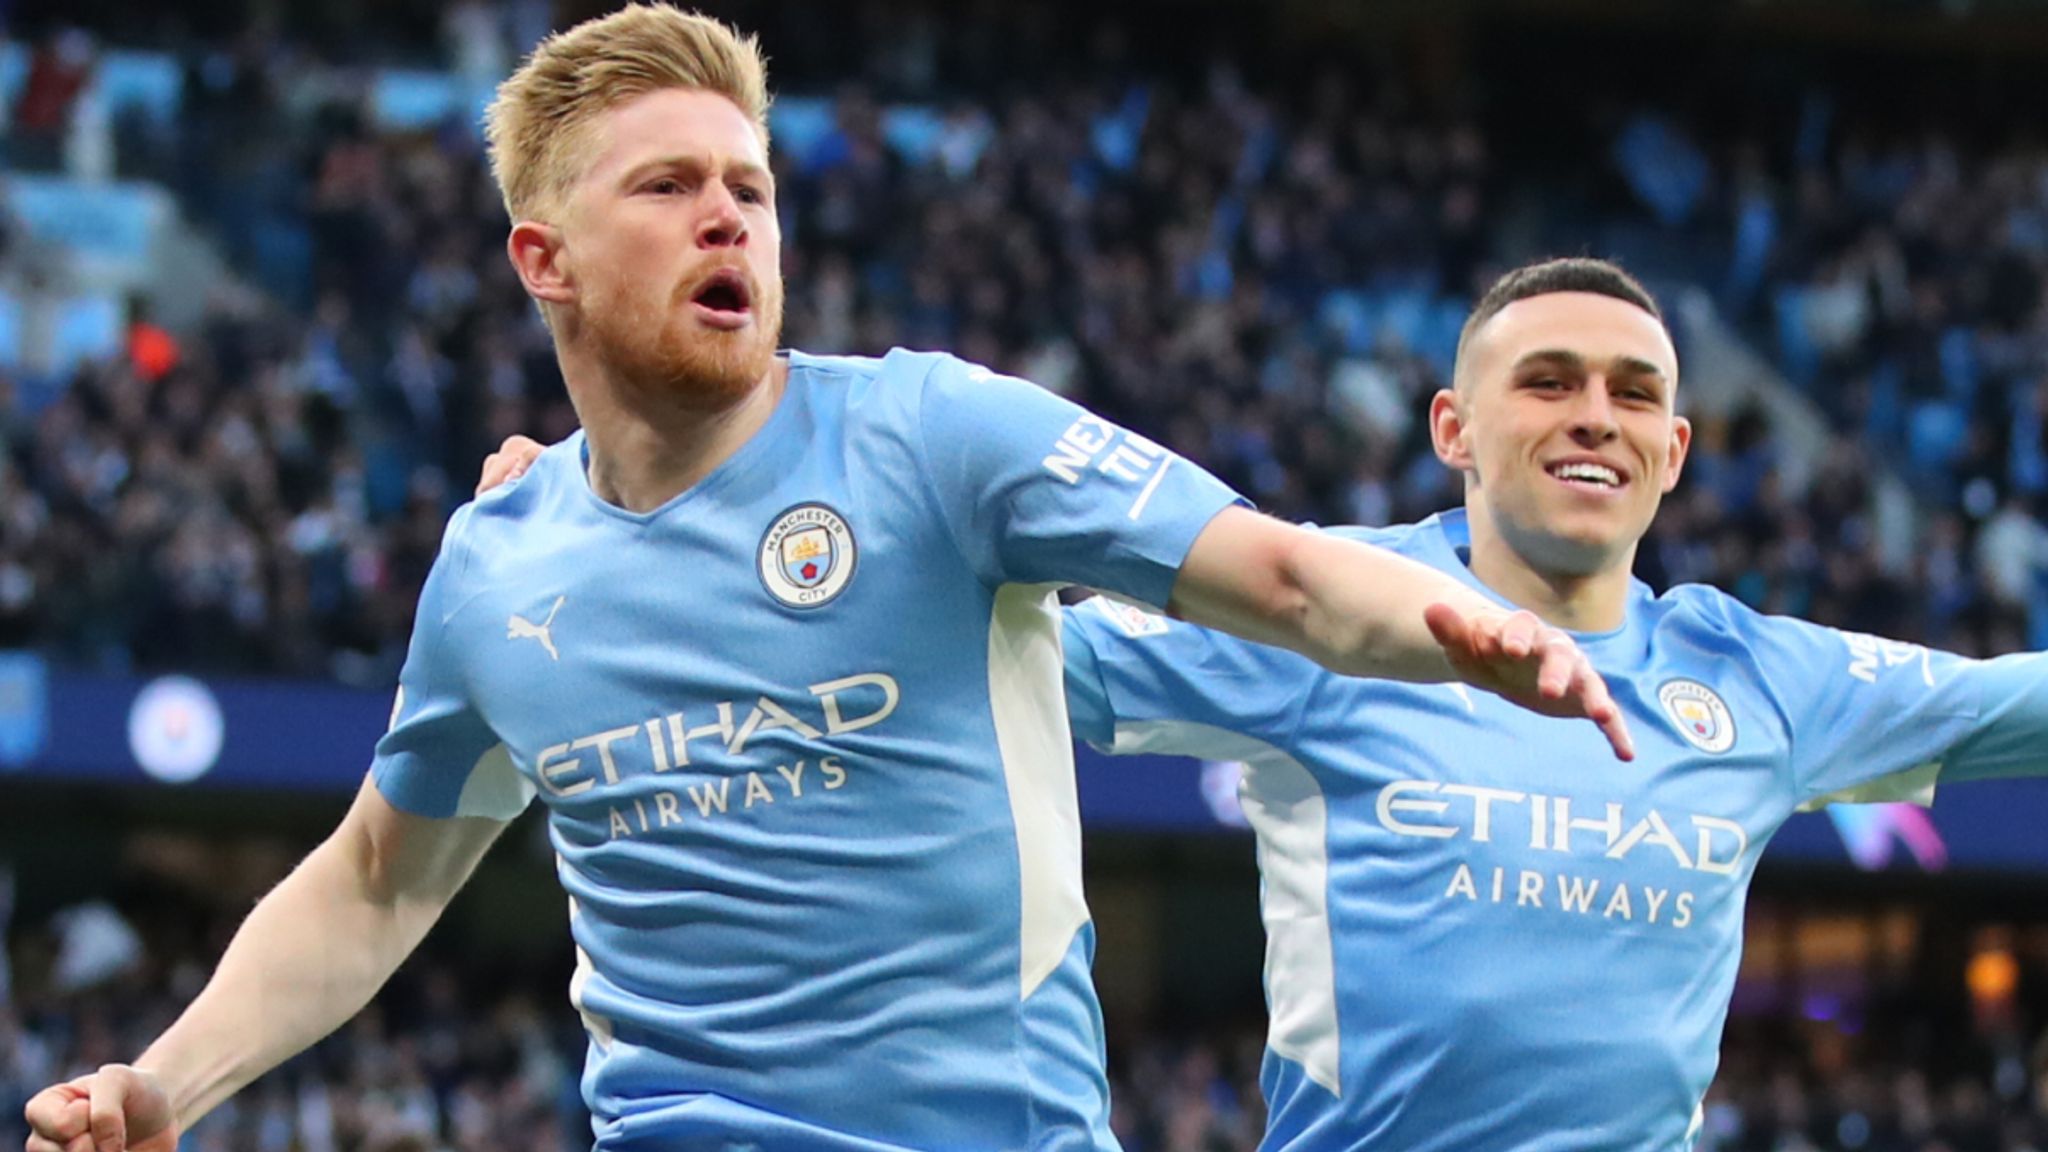 Man City 4-3 Real Madrid Player ratings as Kevin De Bruyne and Karim Benzema dazzle but Aymeric Laporte struggles Football News Sky Sports